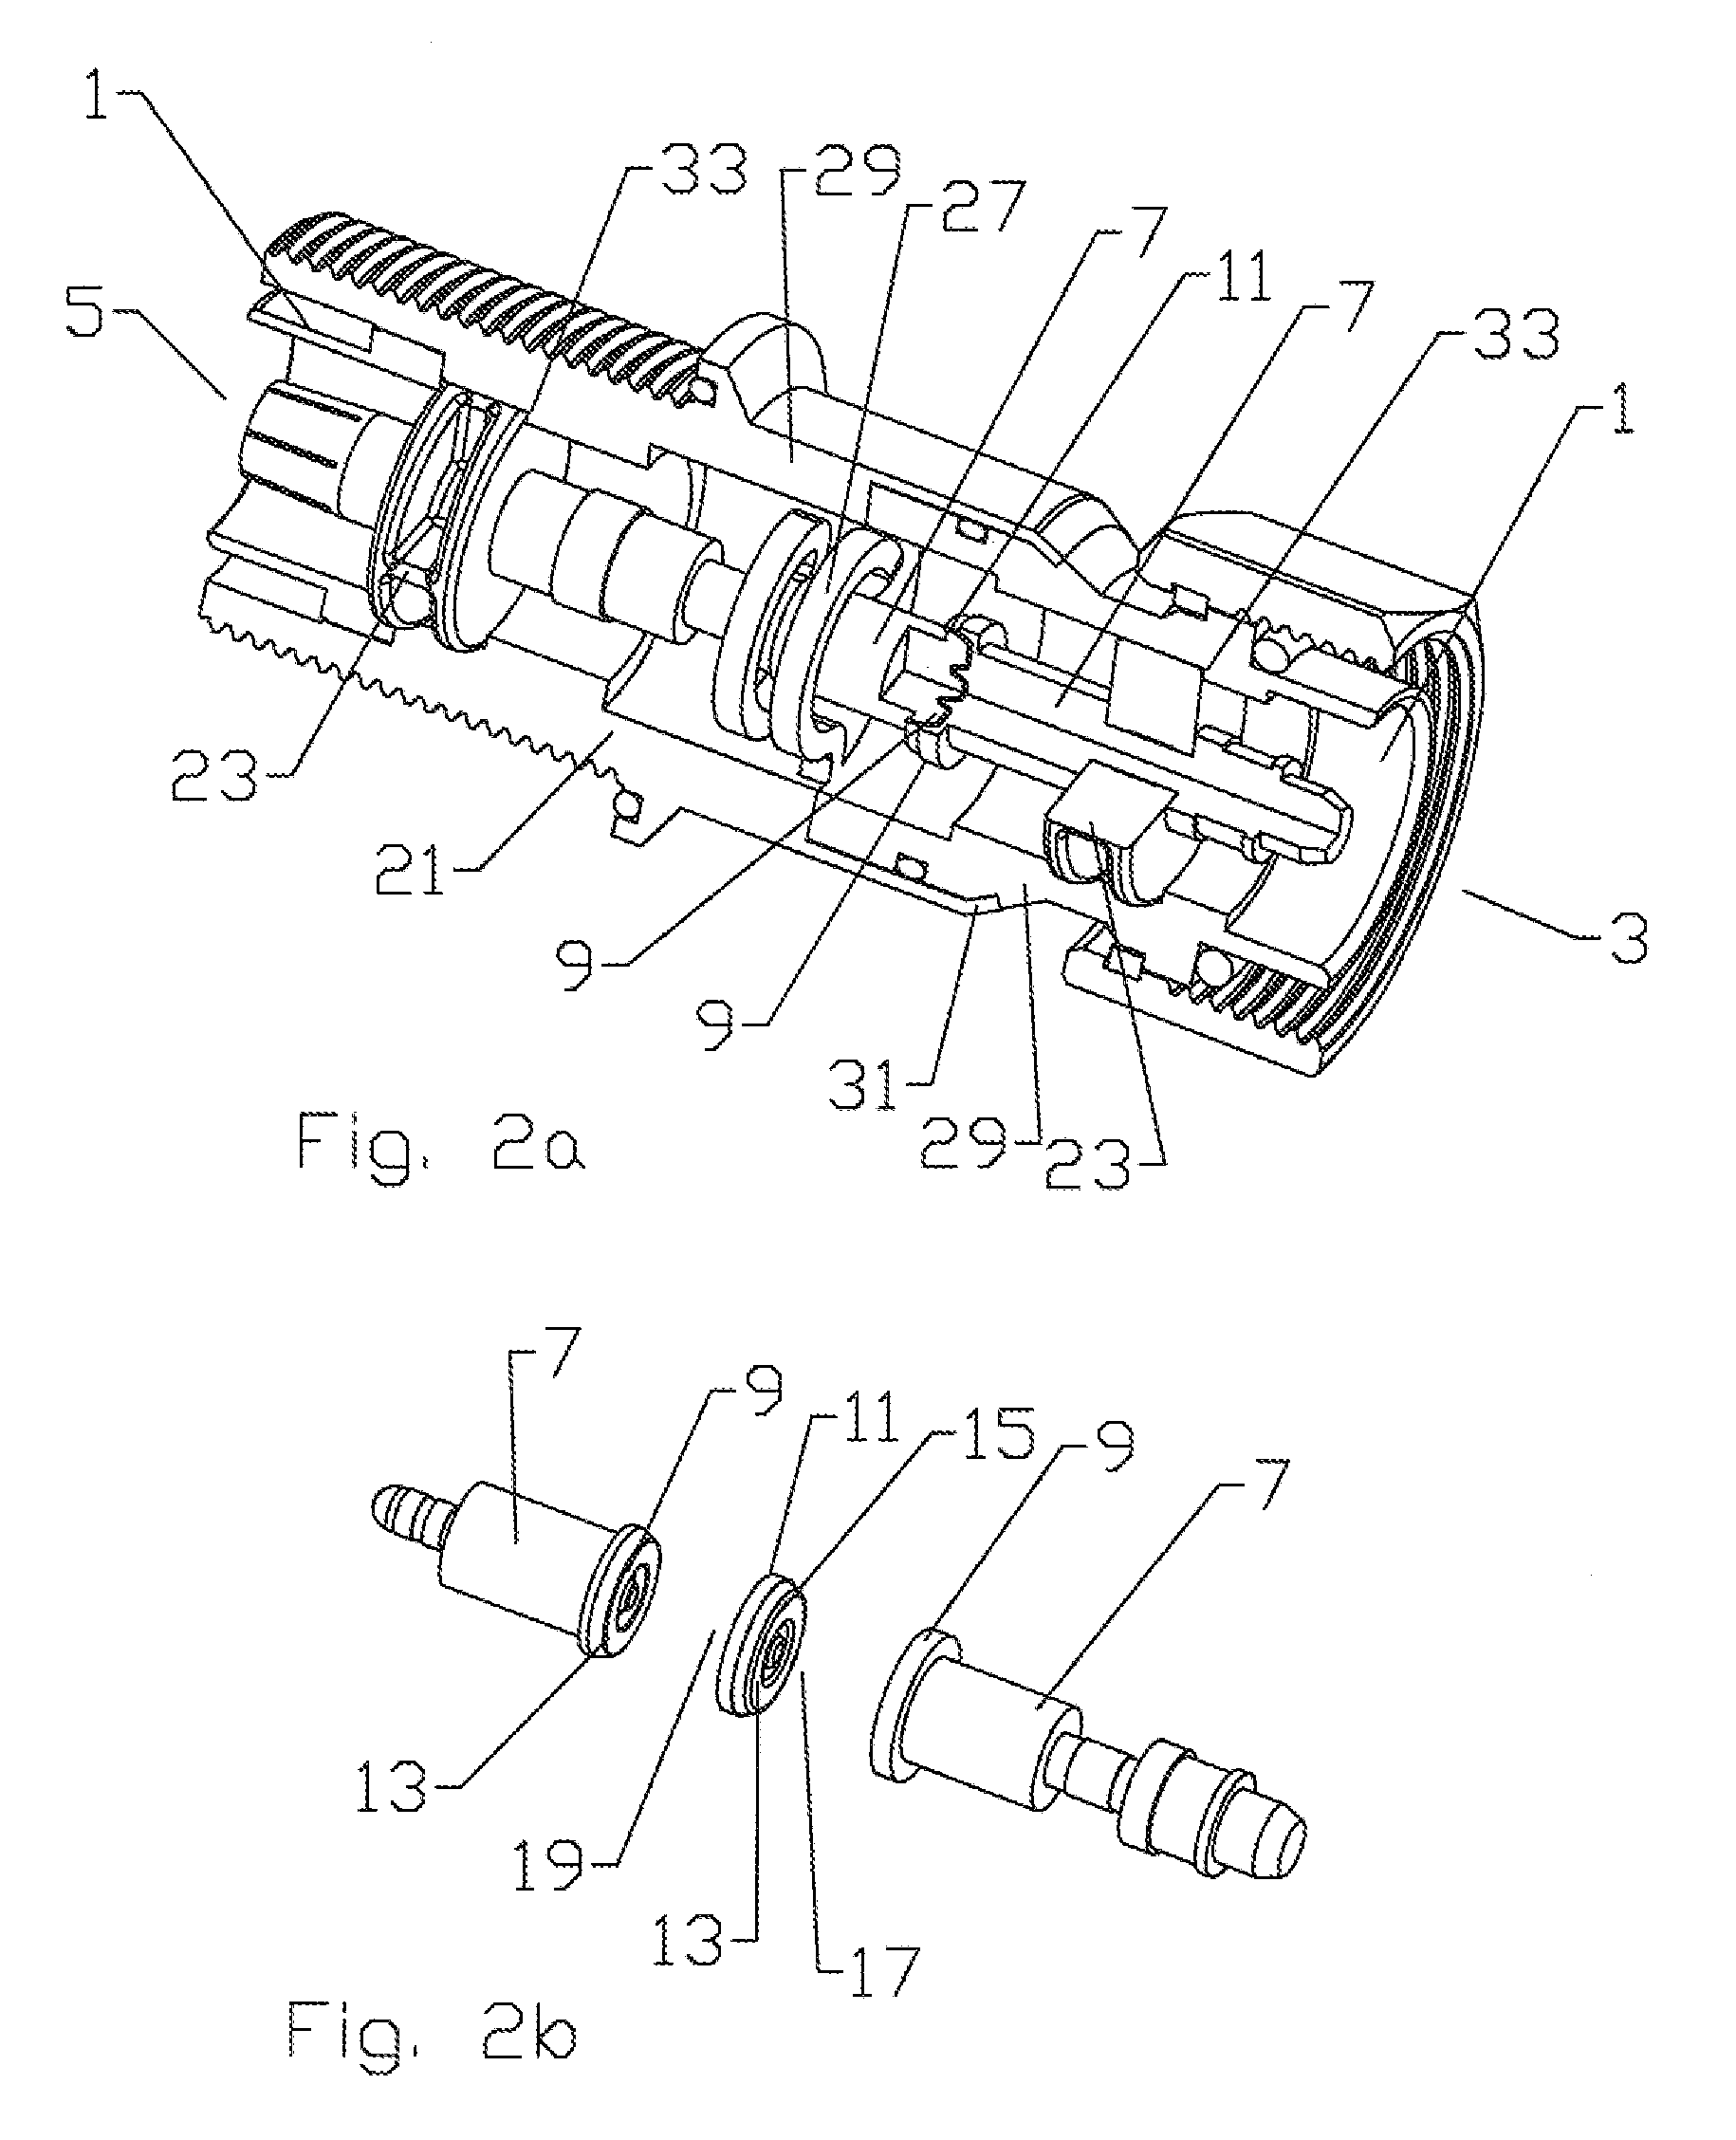 Folded Surface Capacitor In-line Assembly